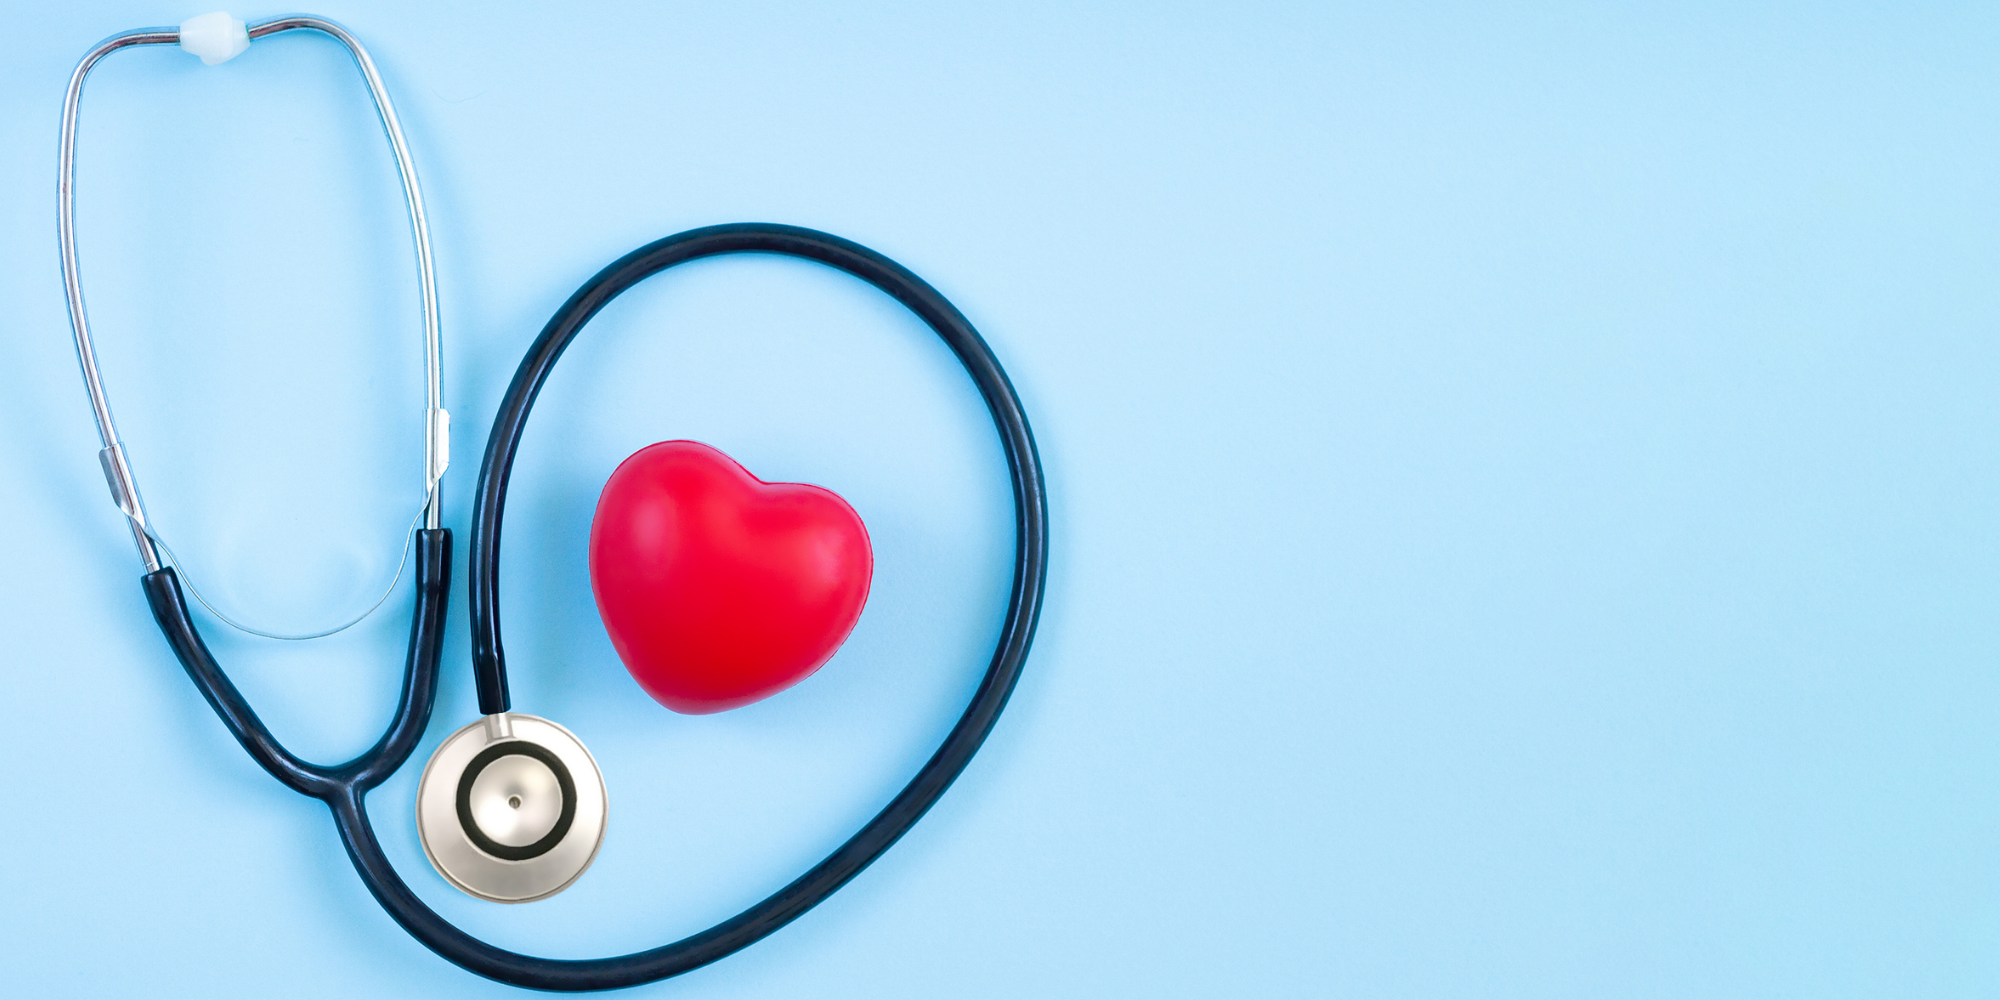 Stethoscope against a pale blue background coiled around a plush heart shape